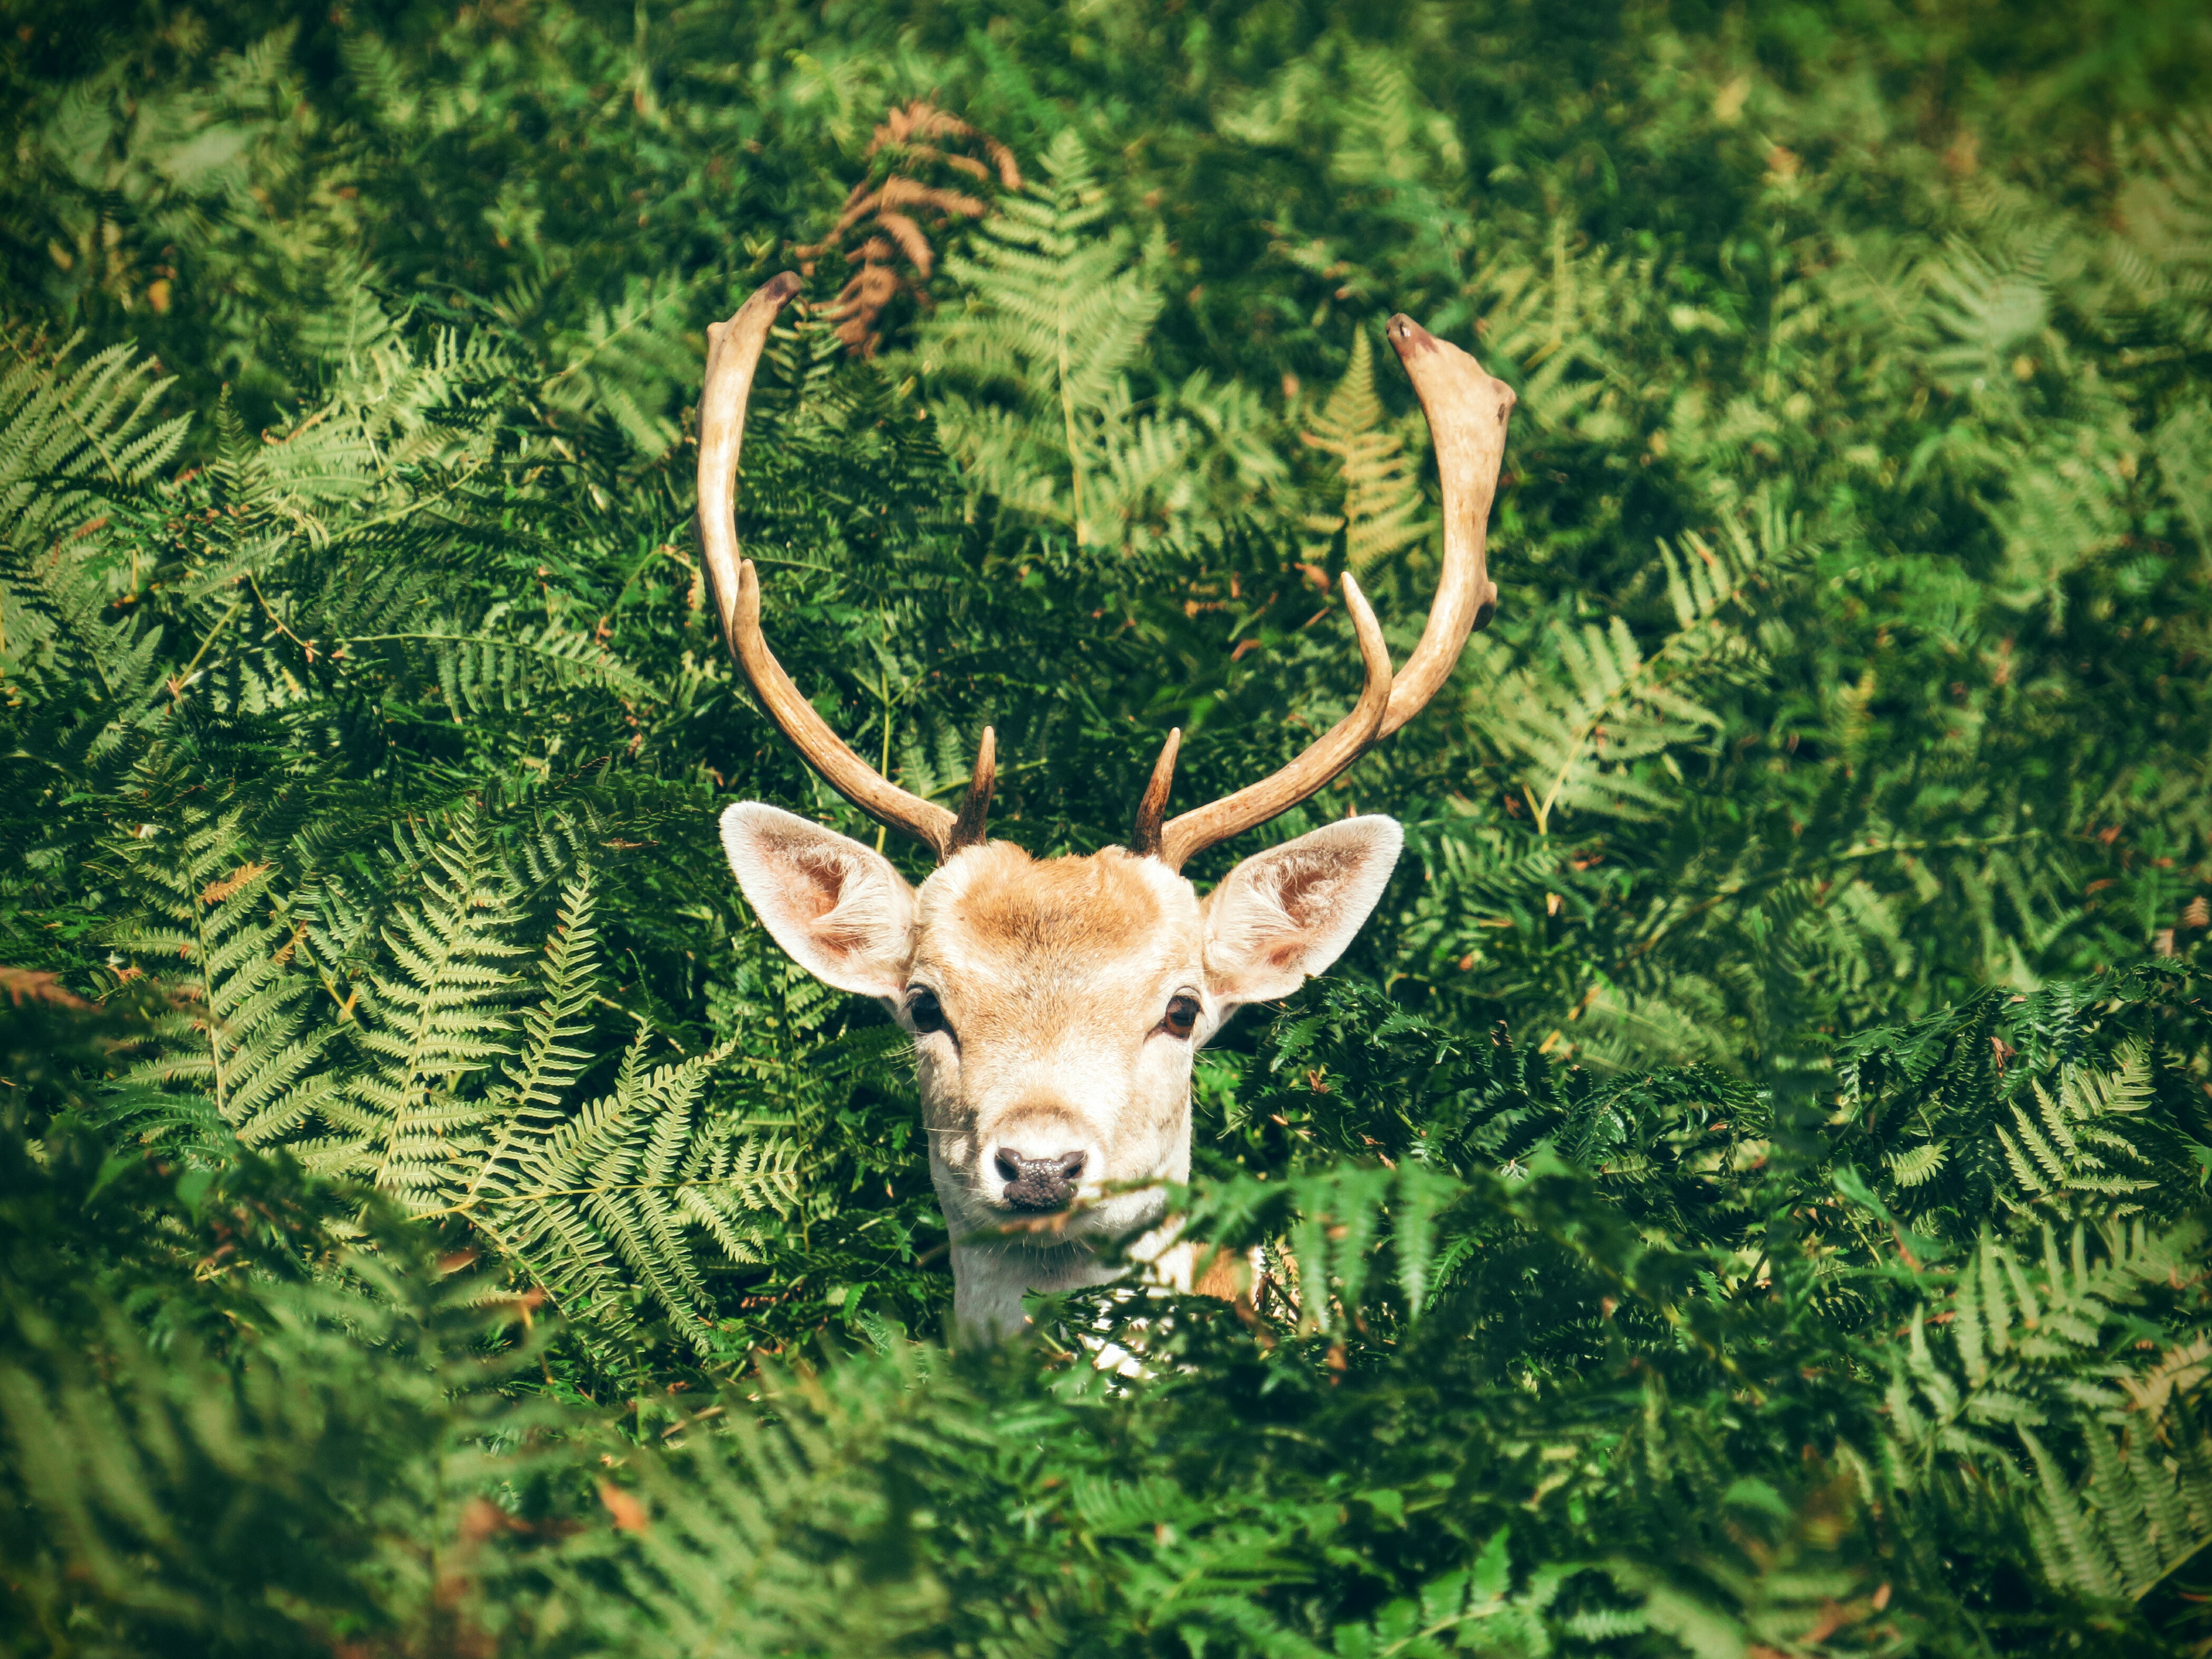 A deer with antlers peeks out of a shrubbery